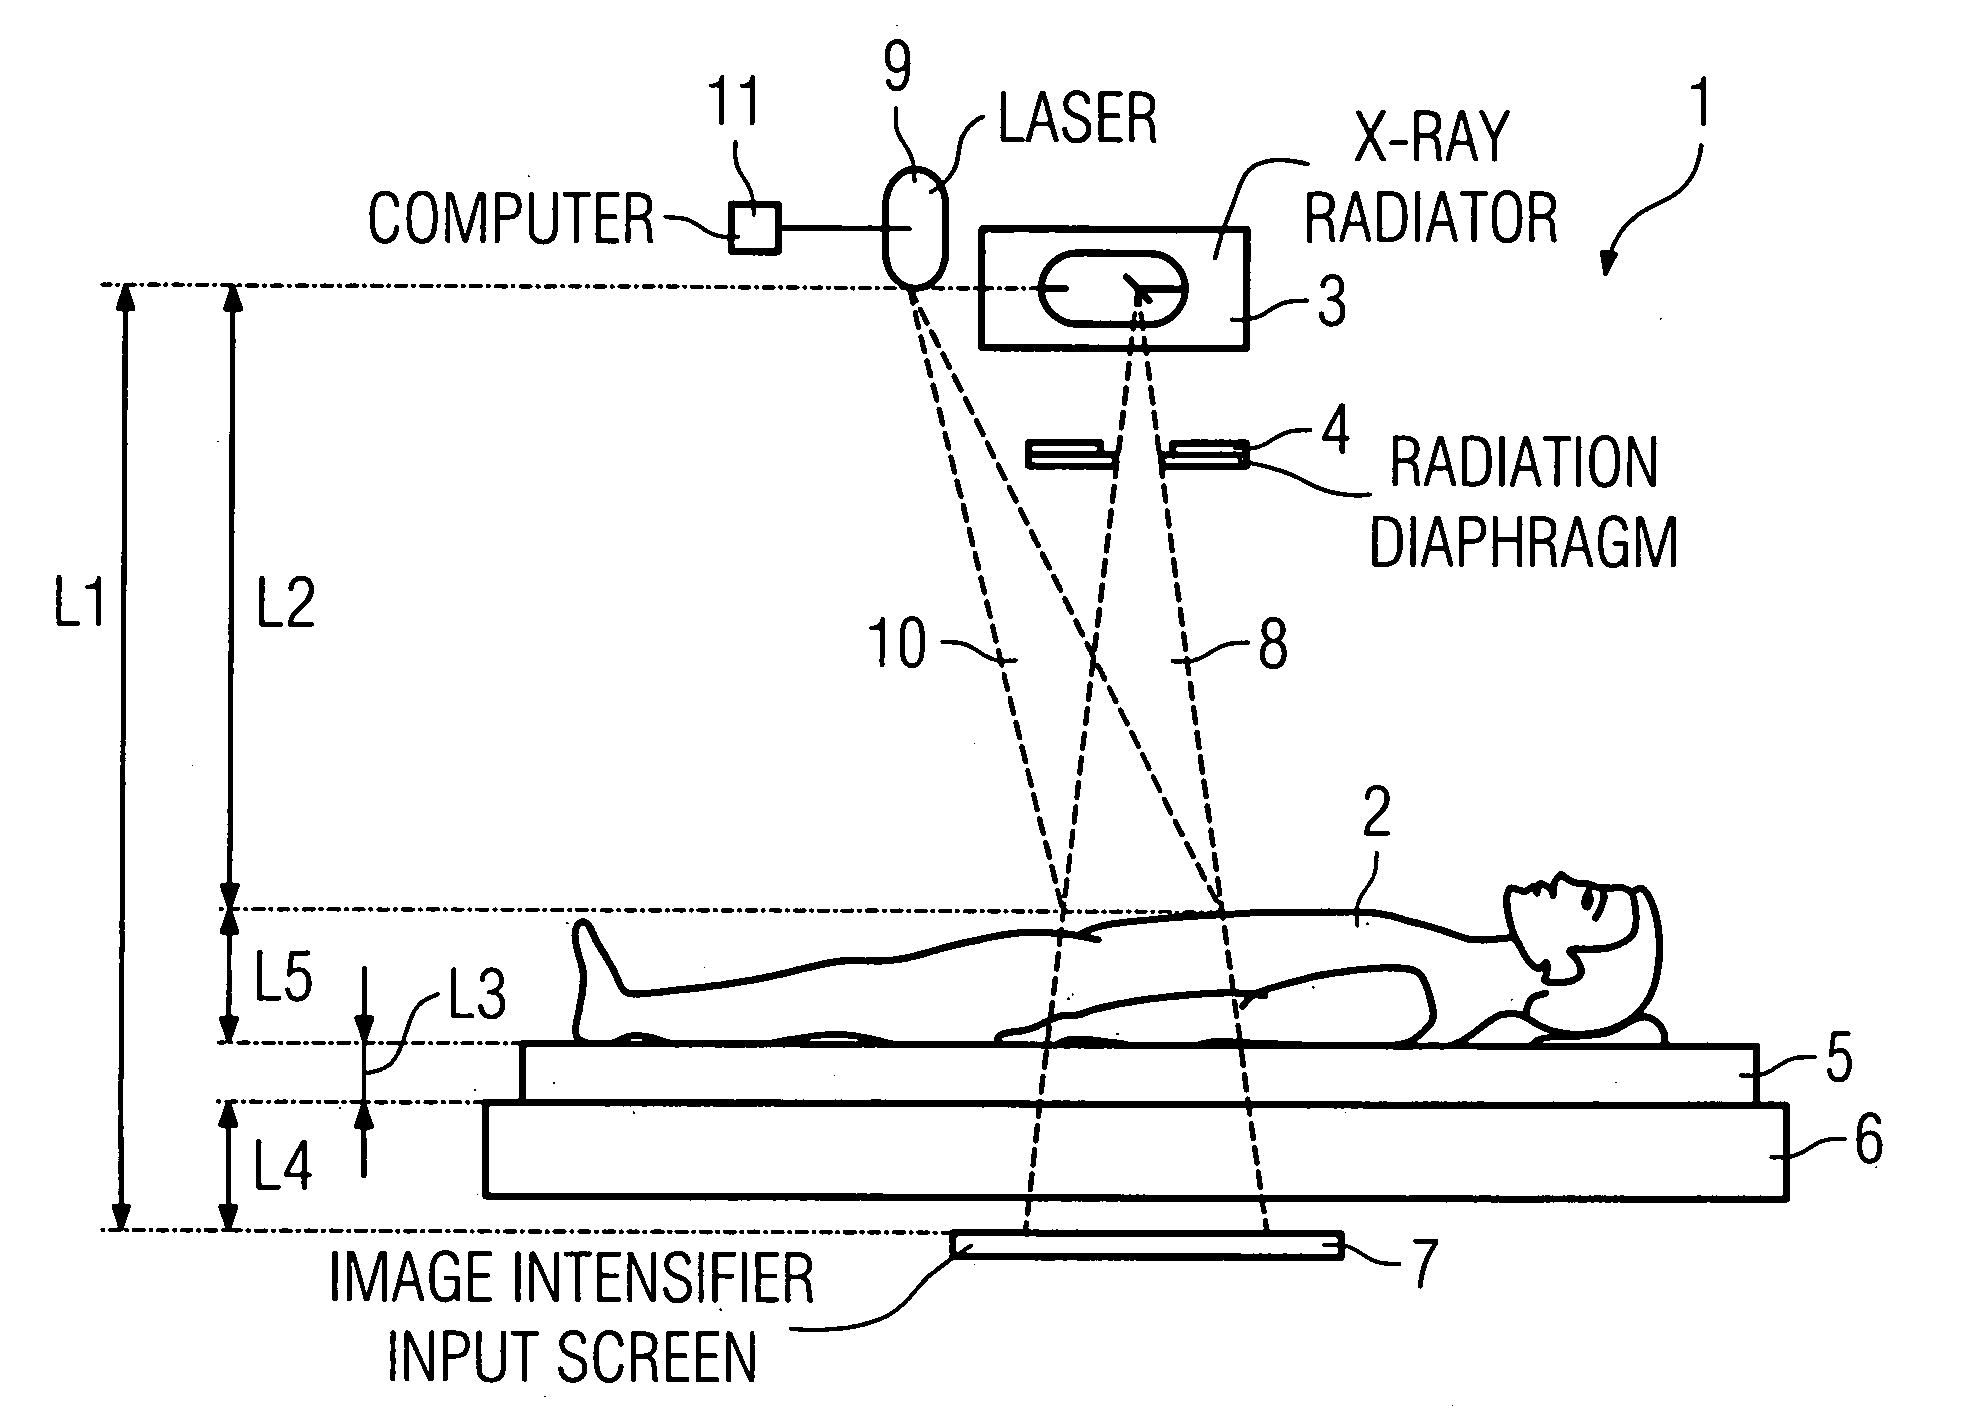 Method and x-ray apparatus for determining the x-ray dose in an x-ray examination